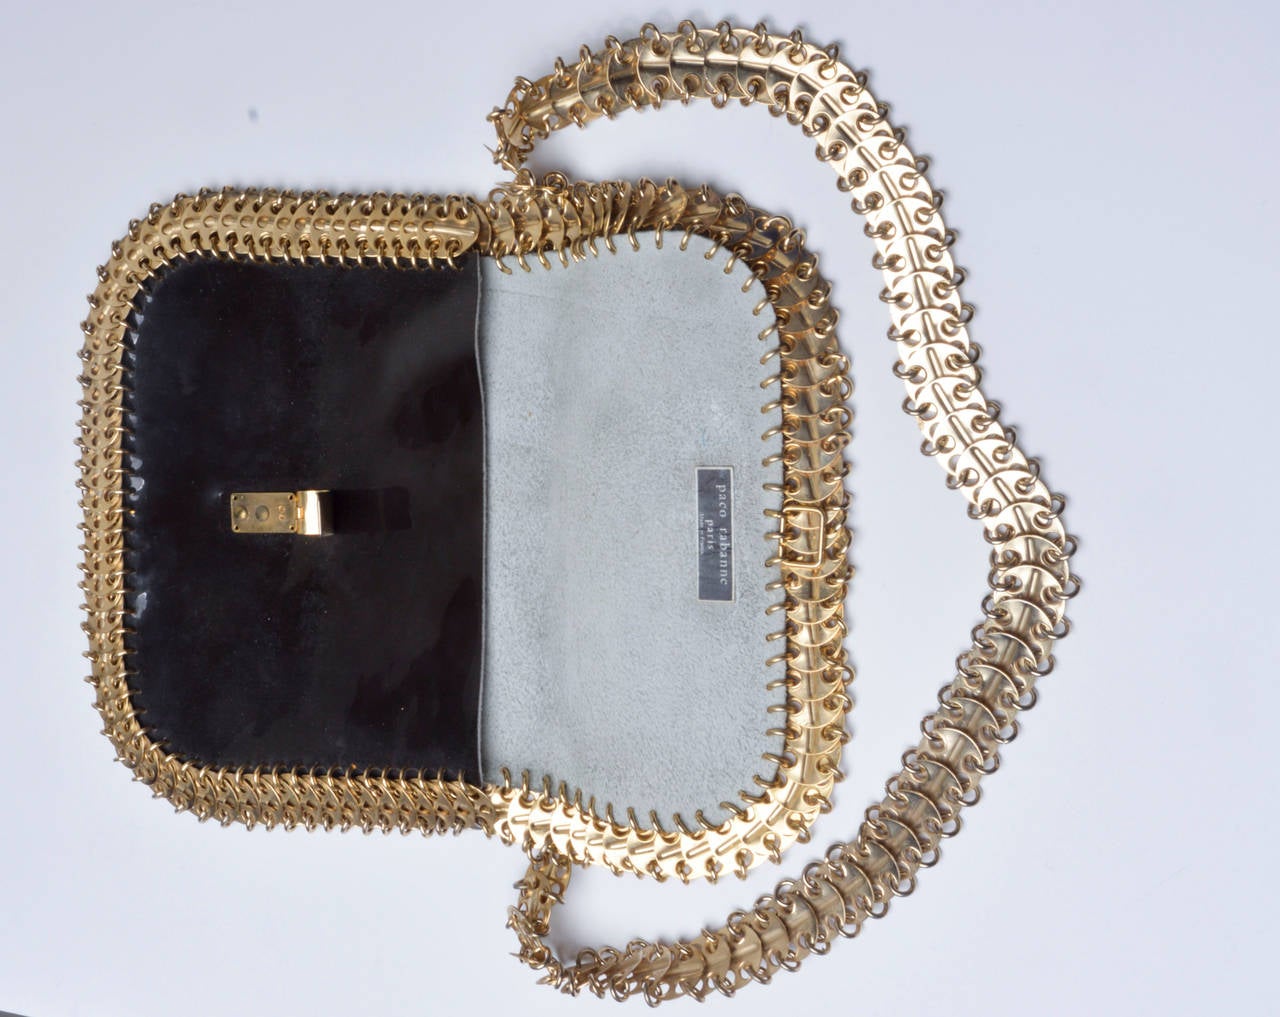 Iconic 1960's Paco Rabanne purse in chocolate brown patent leather.
Gold metal chain link strap and trim.
Fold over clasp.